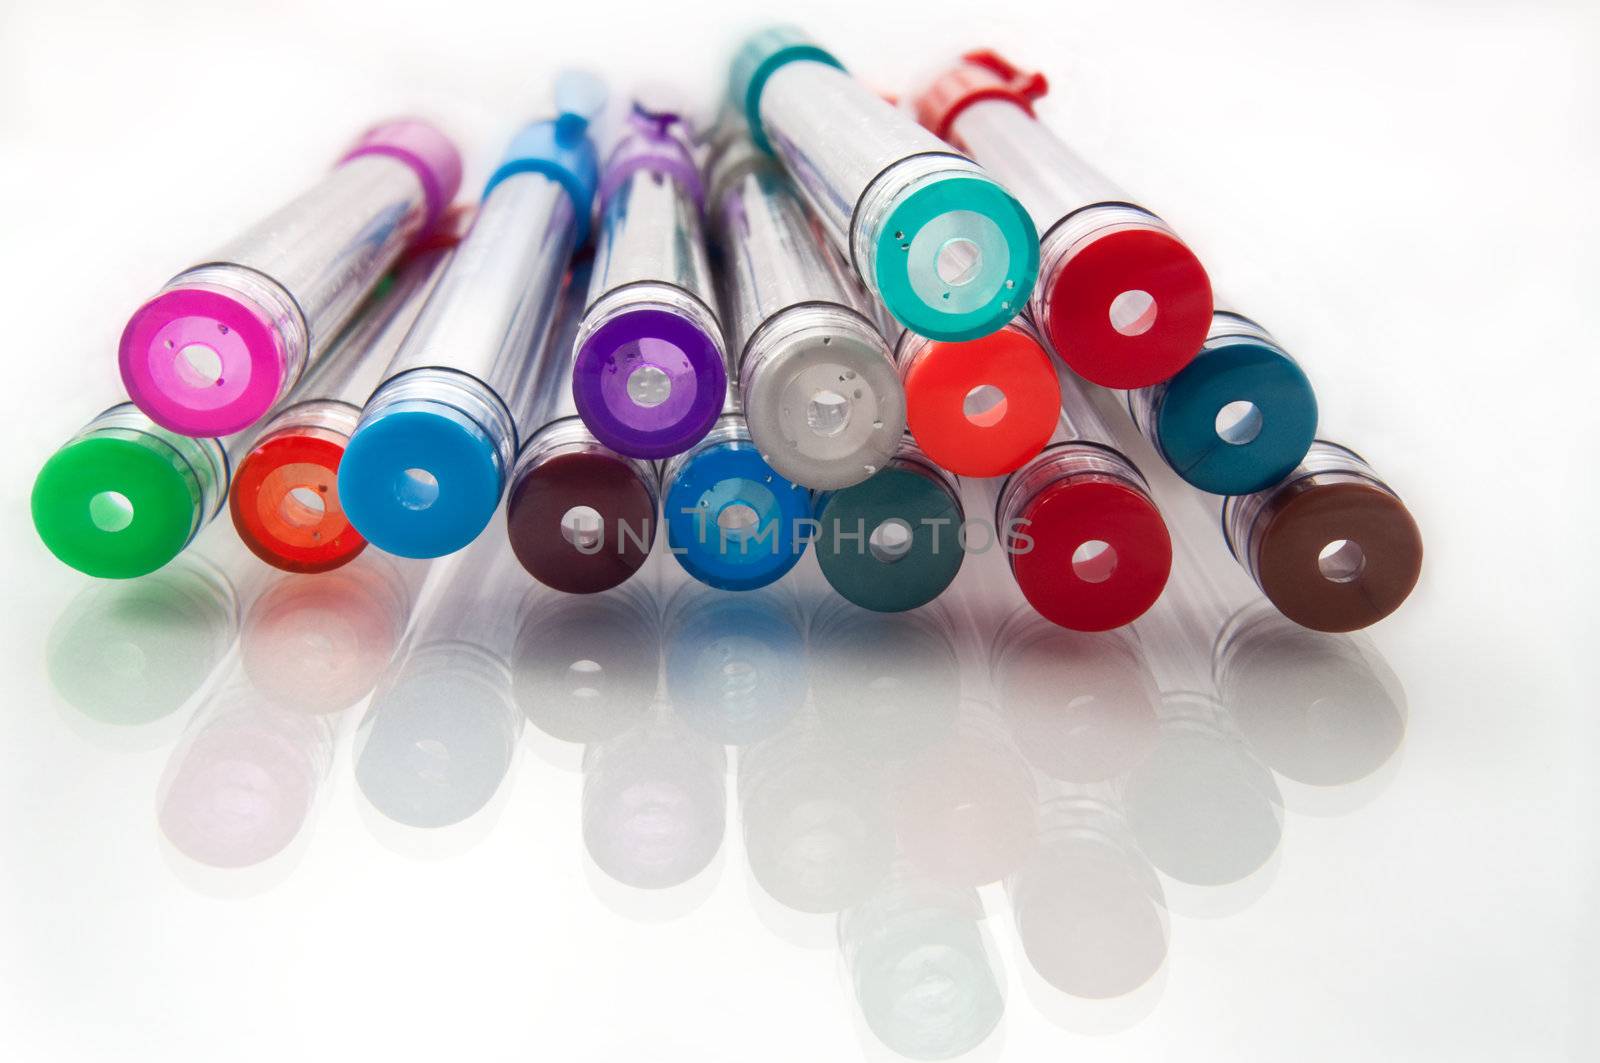 Close and low level angle capturing the ends of many assorted coloured gel pens arranged on a white reflective surface.